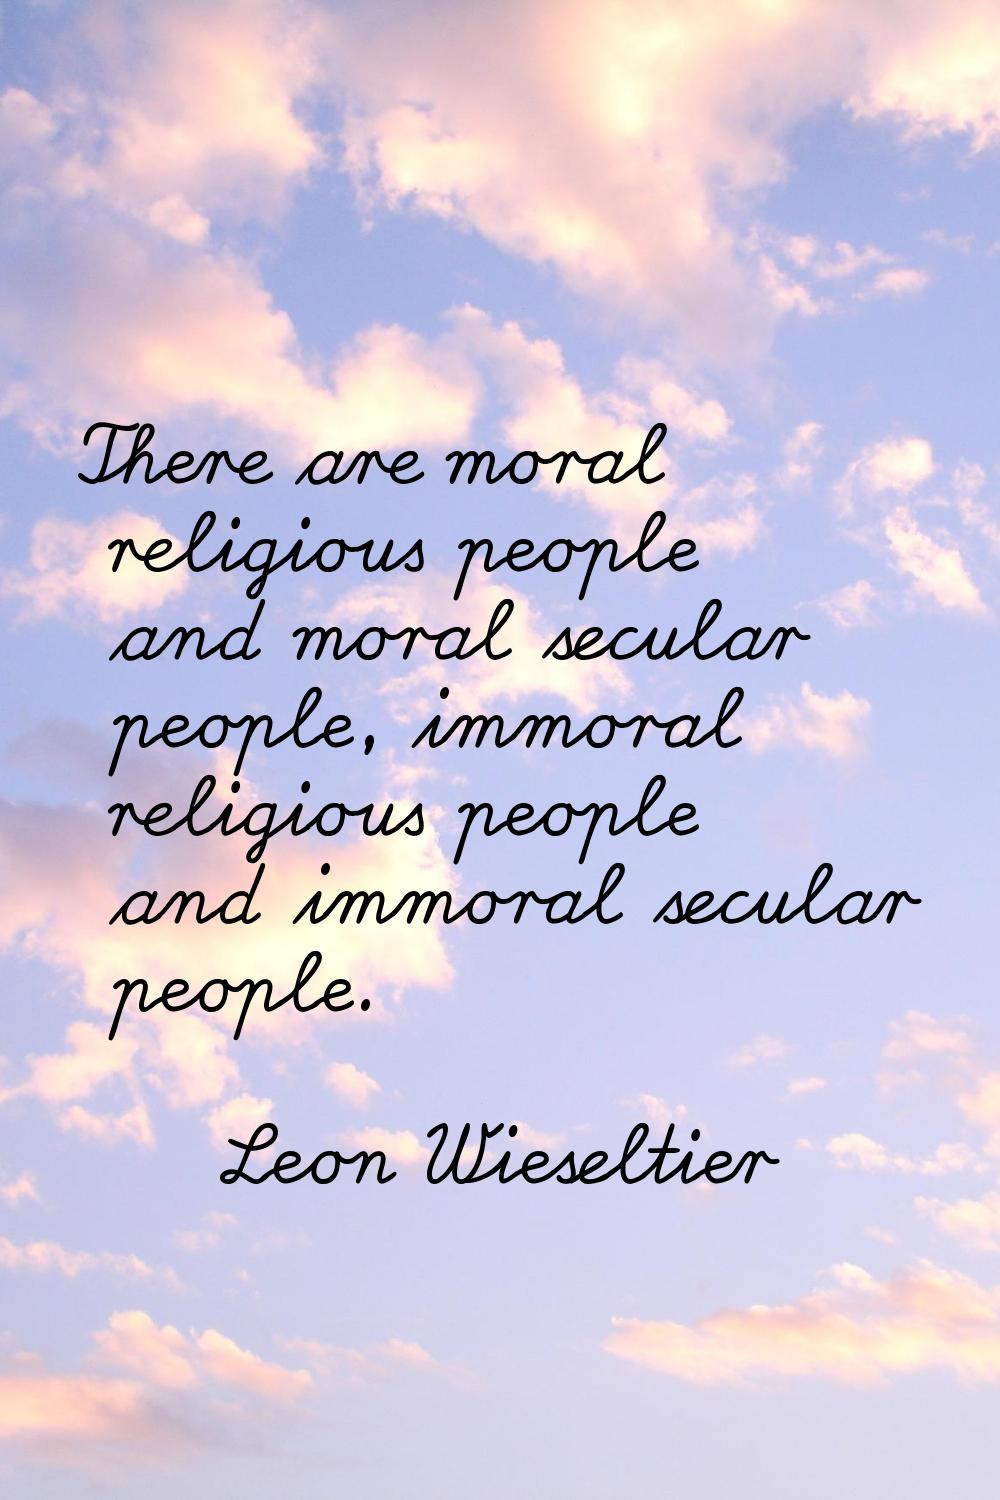 There are moral religious people and moral secular people, immoral religious people and immoral sec